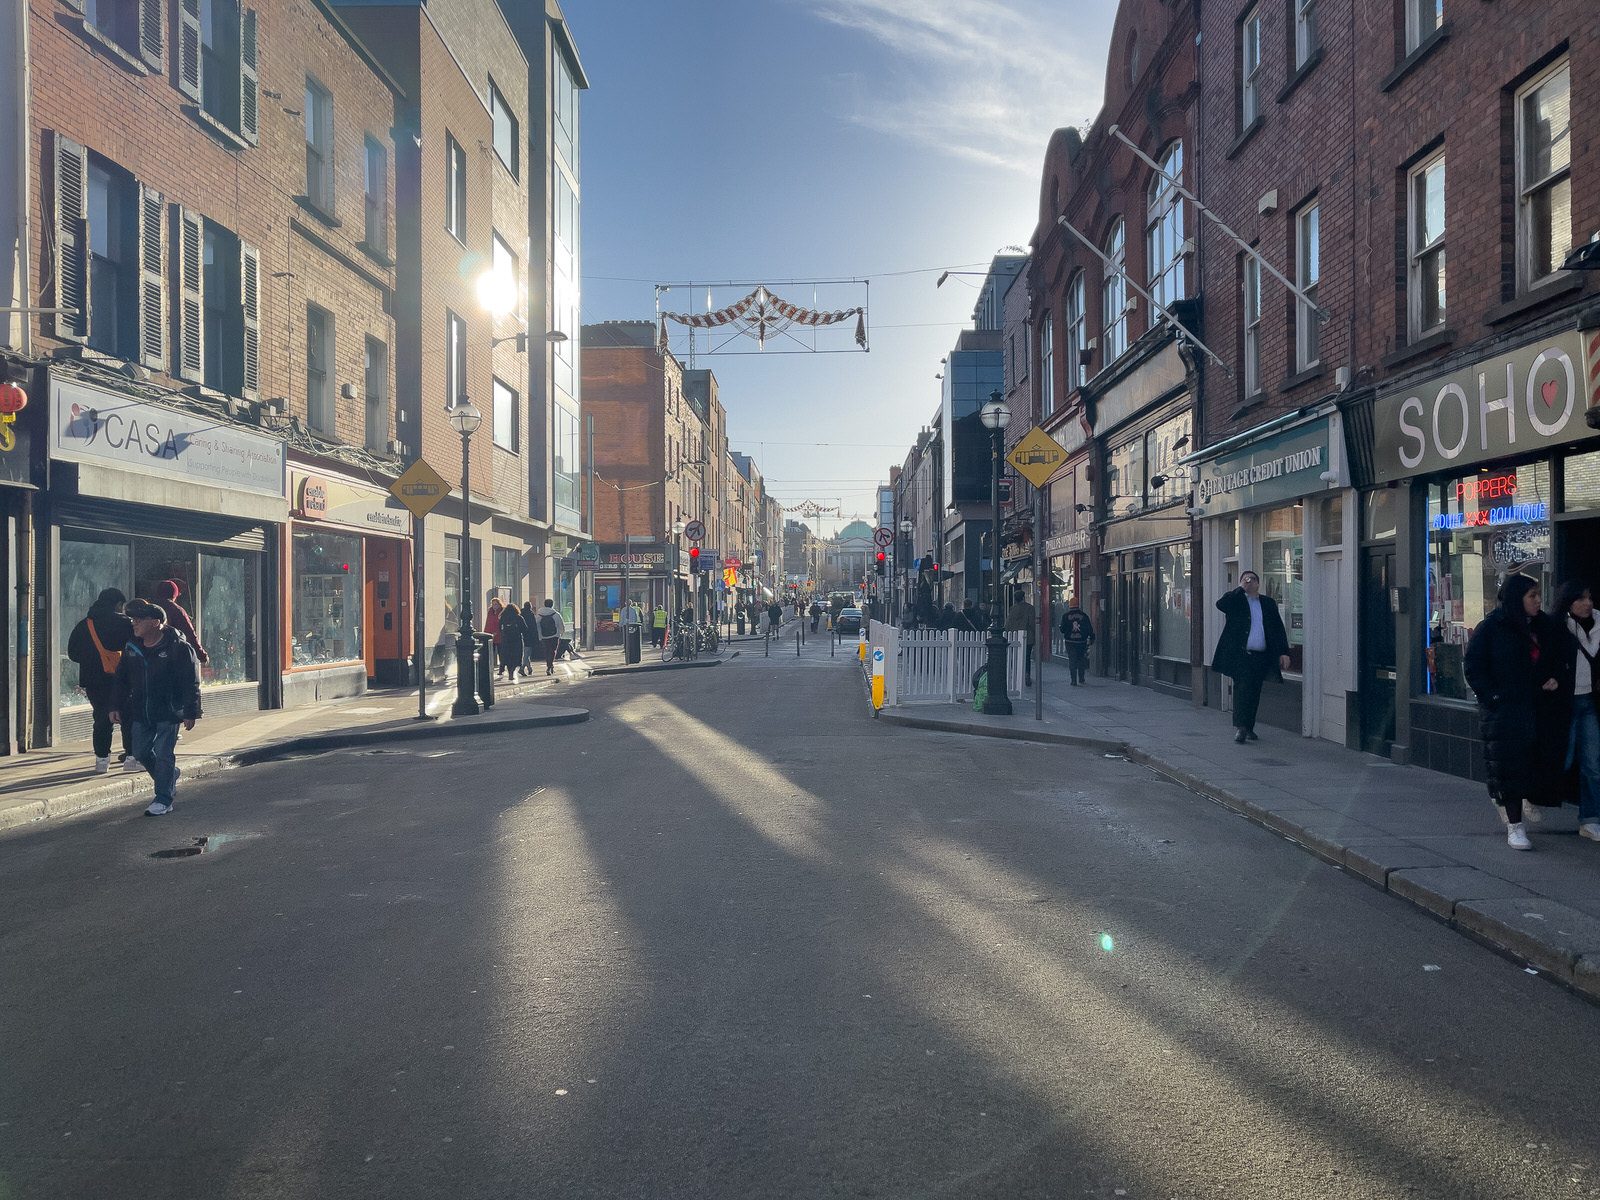 THE NEW STREET FURNITURE AND THE CHRISTMAS TREE [HAVE ARRIVED IN CAPEL STREET]-225865-1